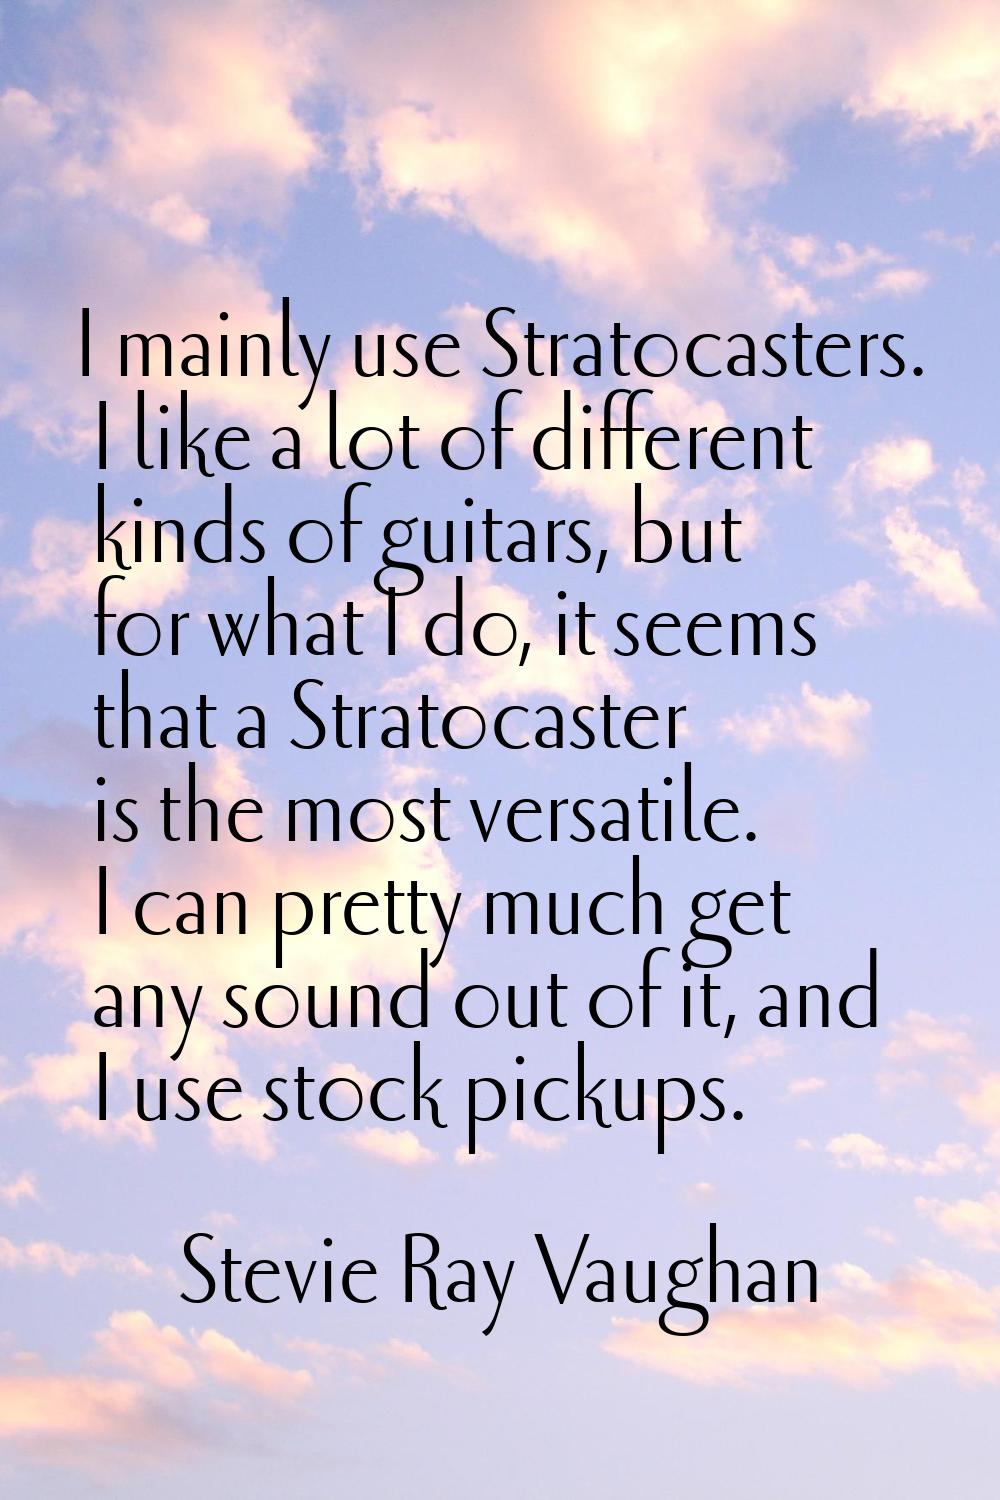 I mainly use Stratocasters. I like a lot of different kinds of guitars, but for what I do, it seems